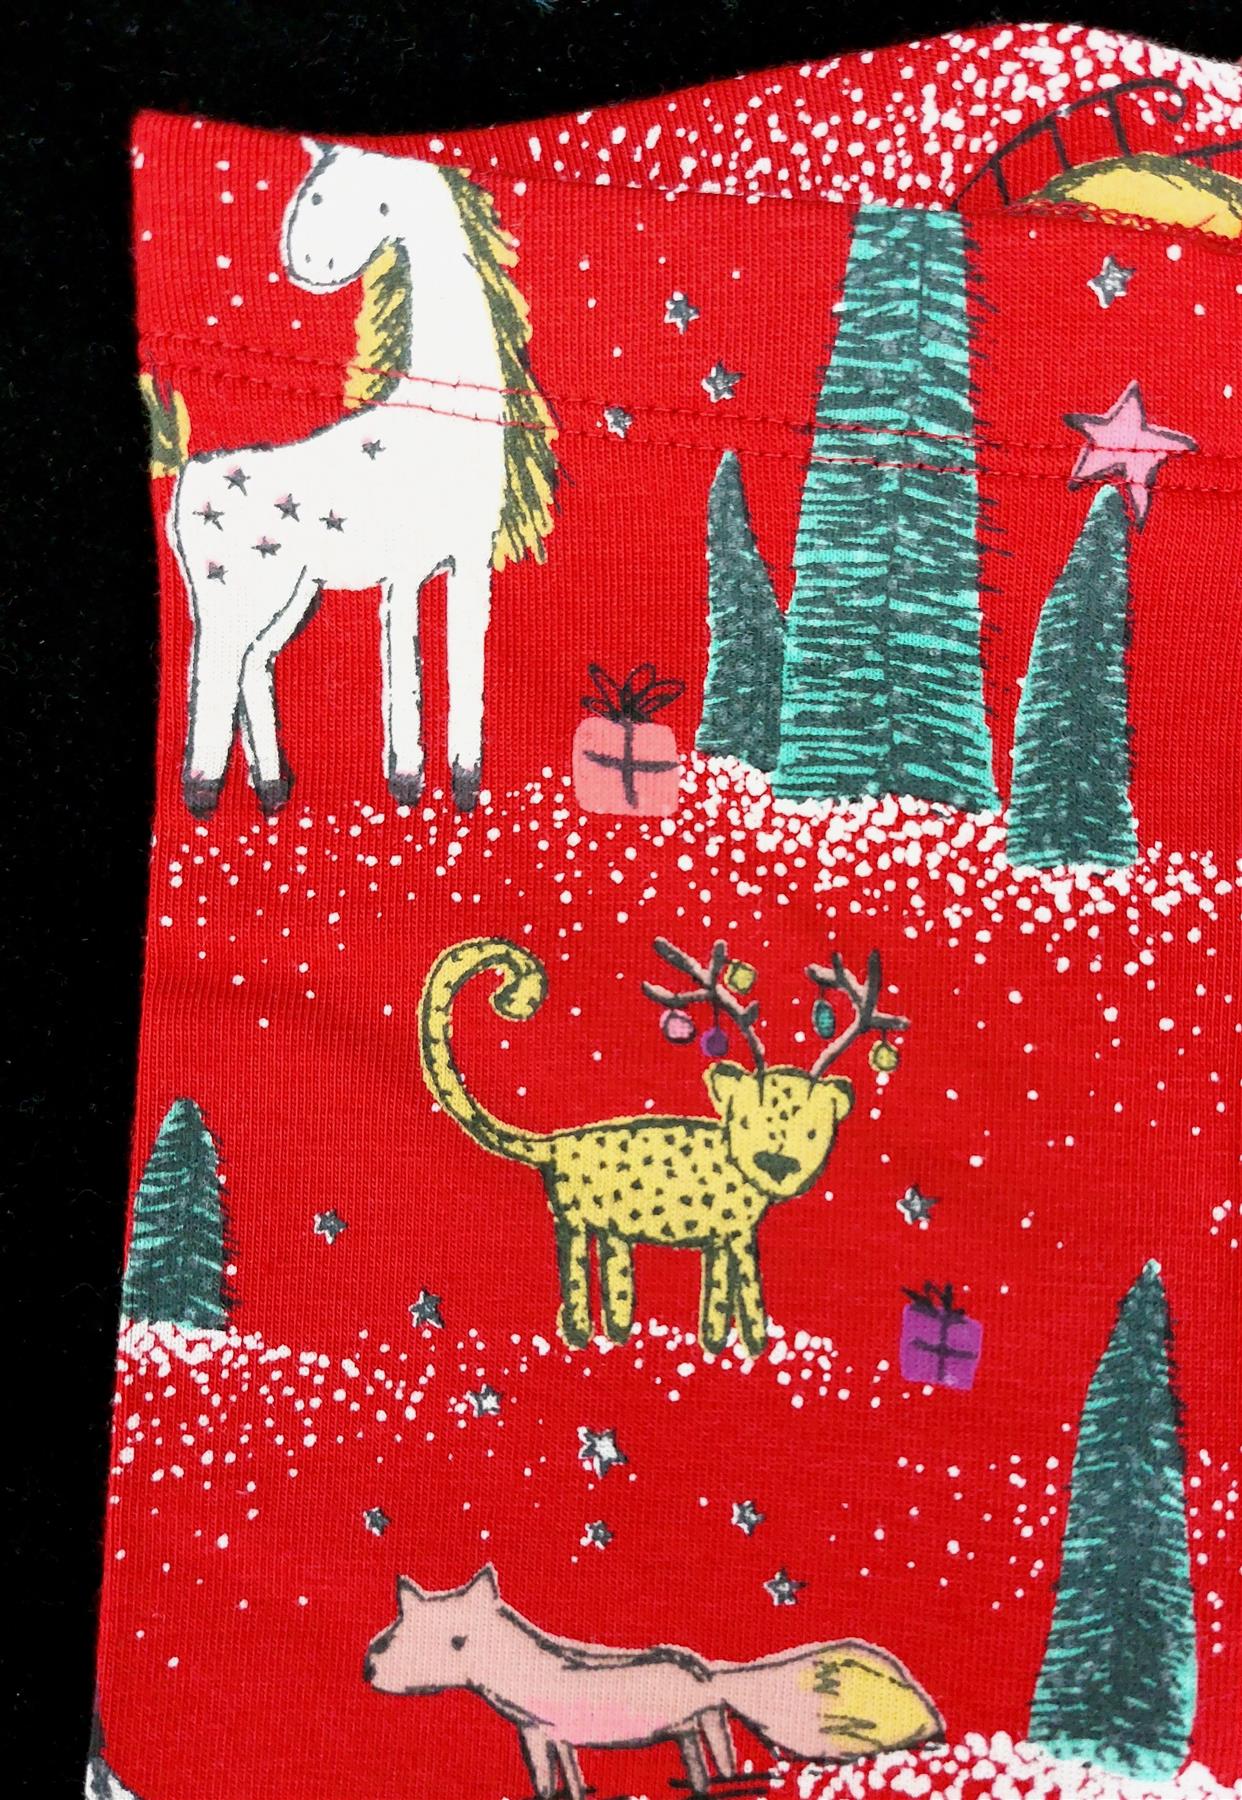 2-Pack Next Baby Soft Christmas Leggings Cotton Rich Cute Animals Chainstore Xmas Brand New